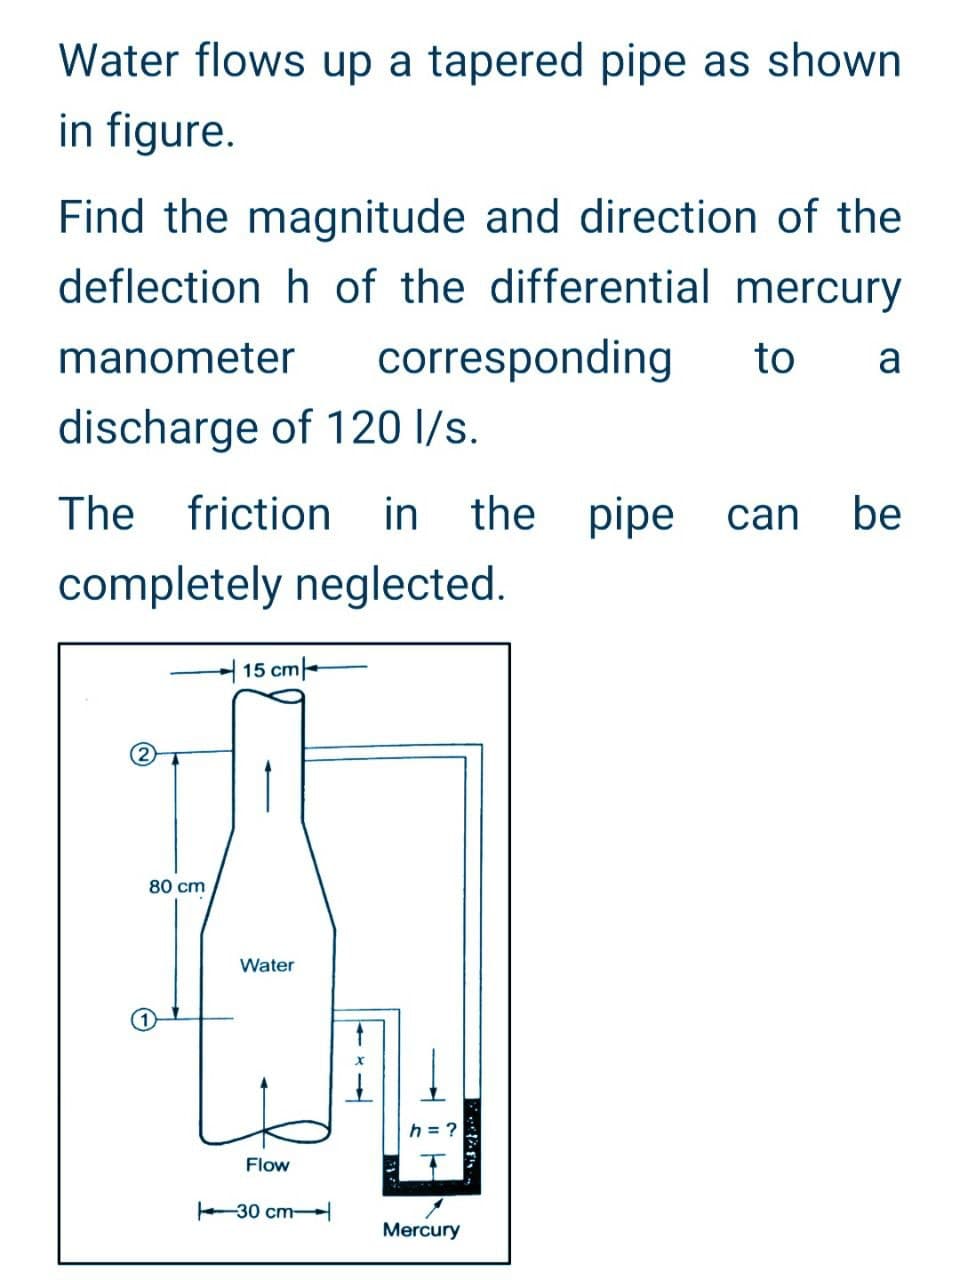 Water flows up a tapered pipe as shown
in figure.
Find the magnitude and direction of the
deflection h of the differential mercury
manometer corresponding to a
discharge of 120 l/s.
The friction in the pipe can be
completely neglected.
80 cm
15 cm
Water
Flow
30 cm-
h = ?
Mercury